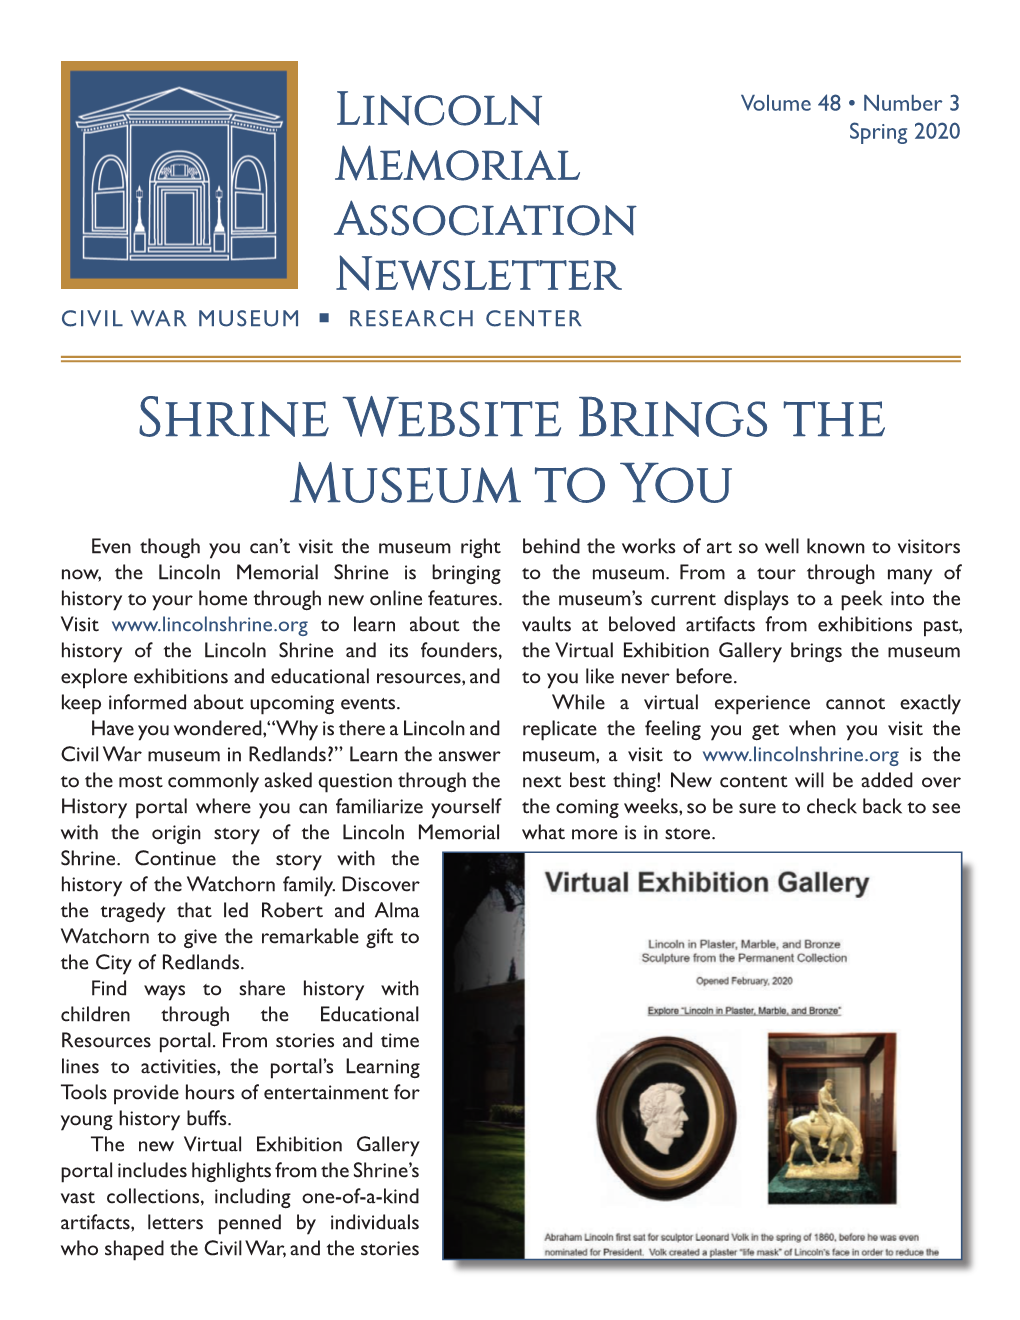 Shrine Website Brings the Museum to You